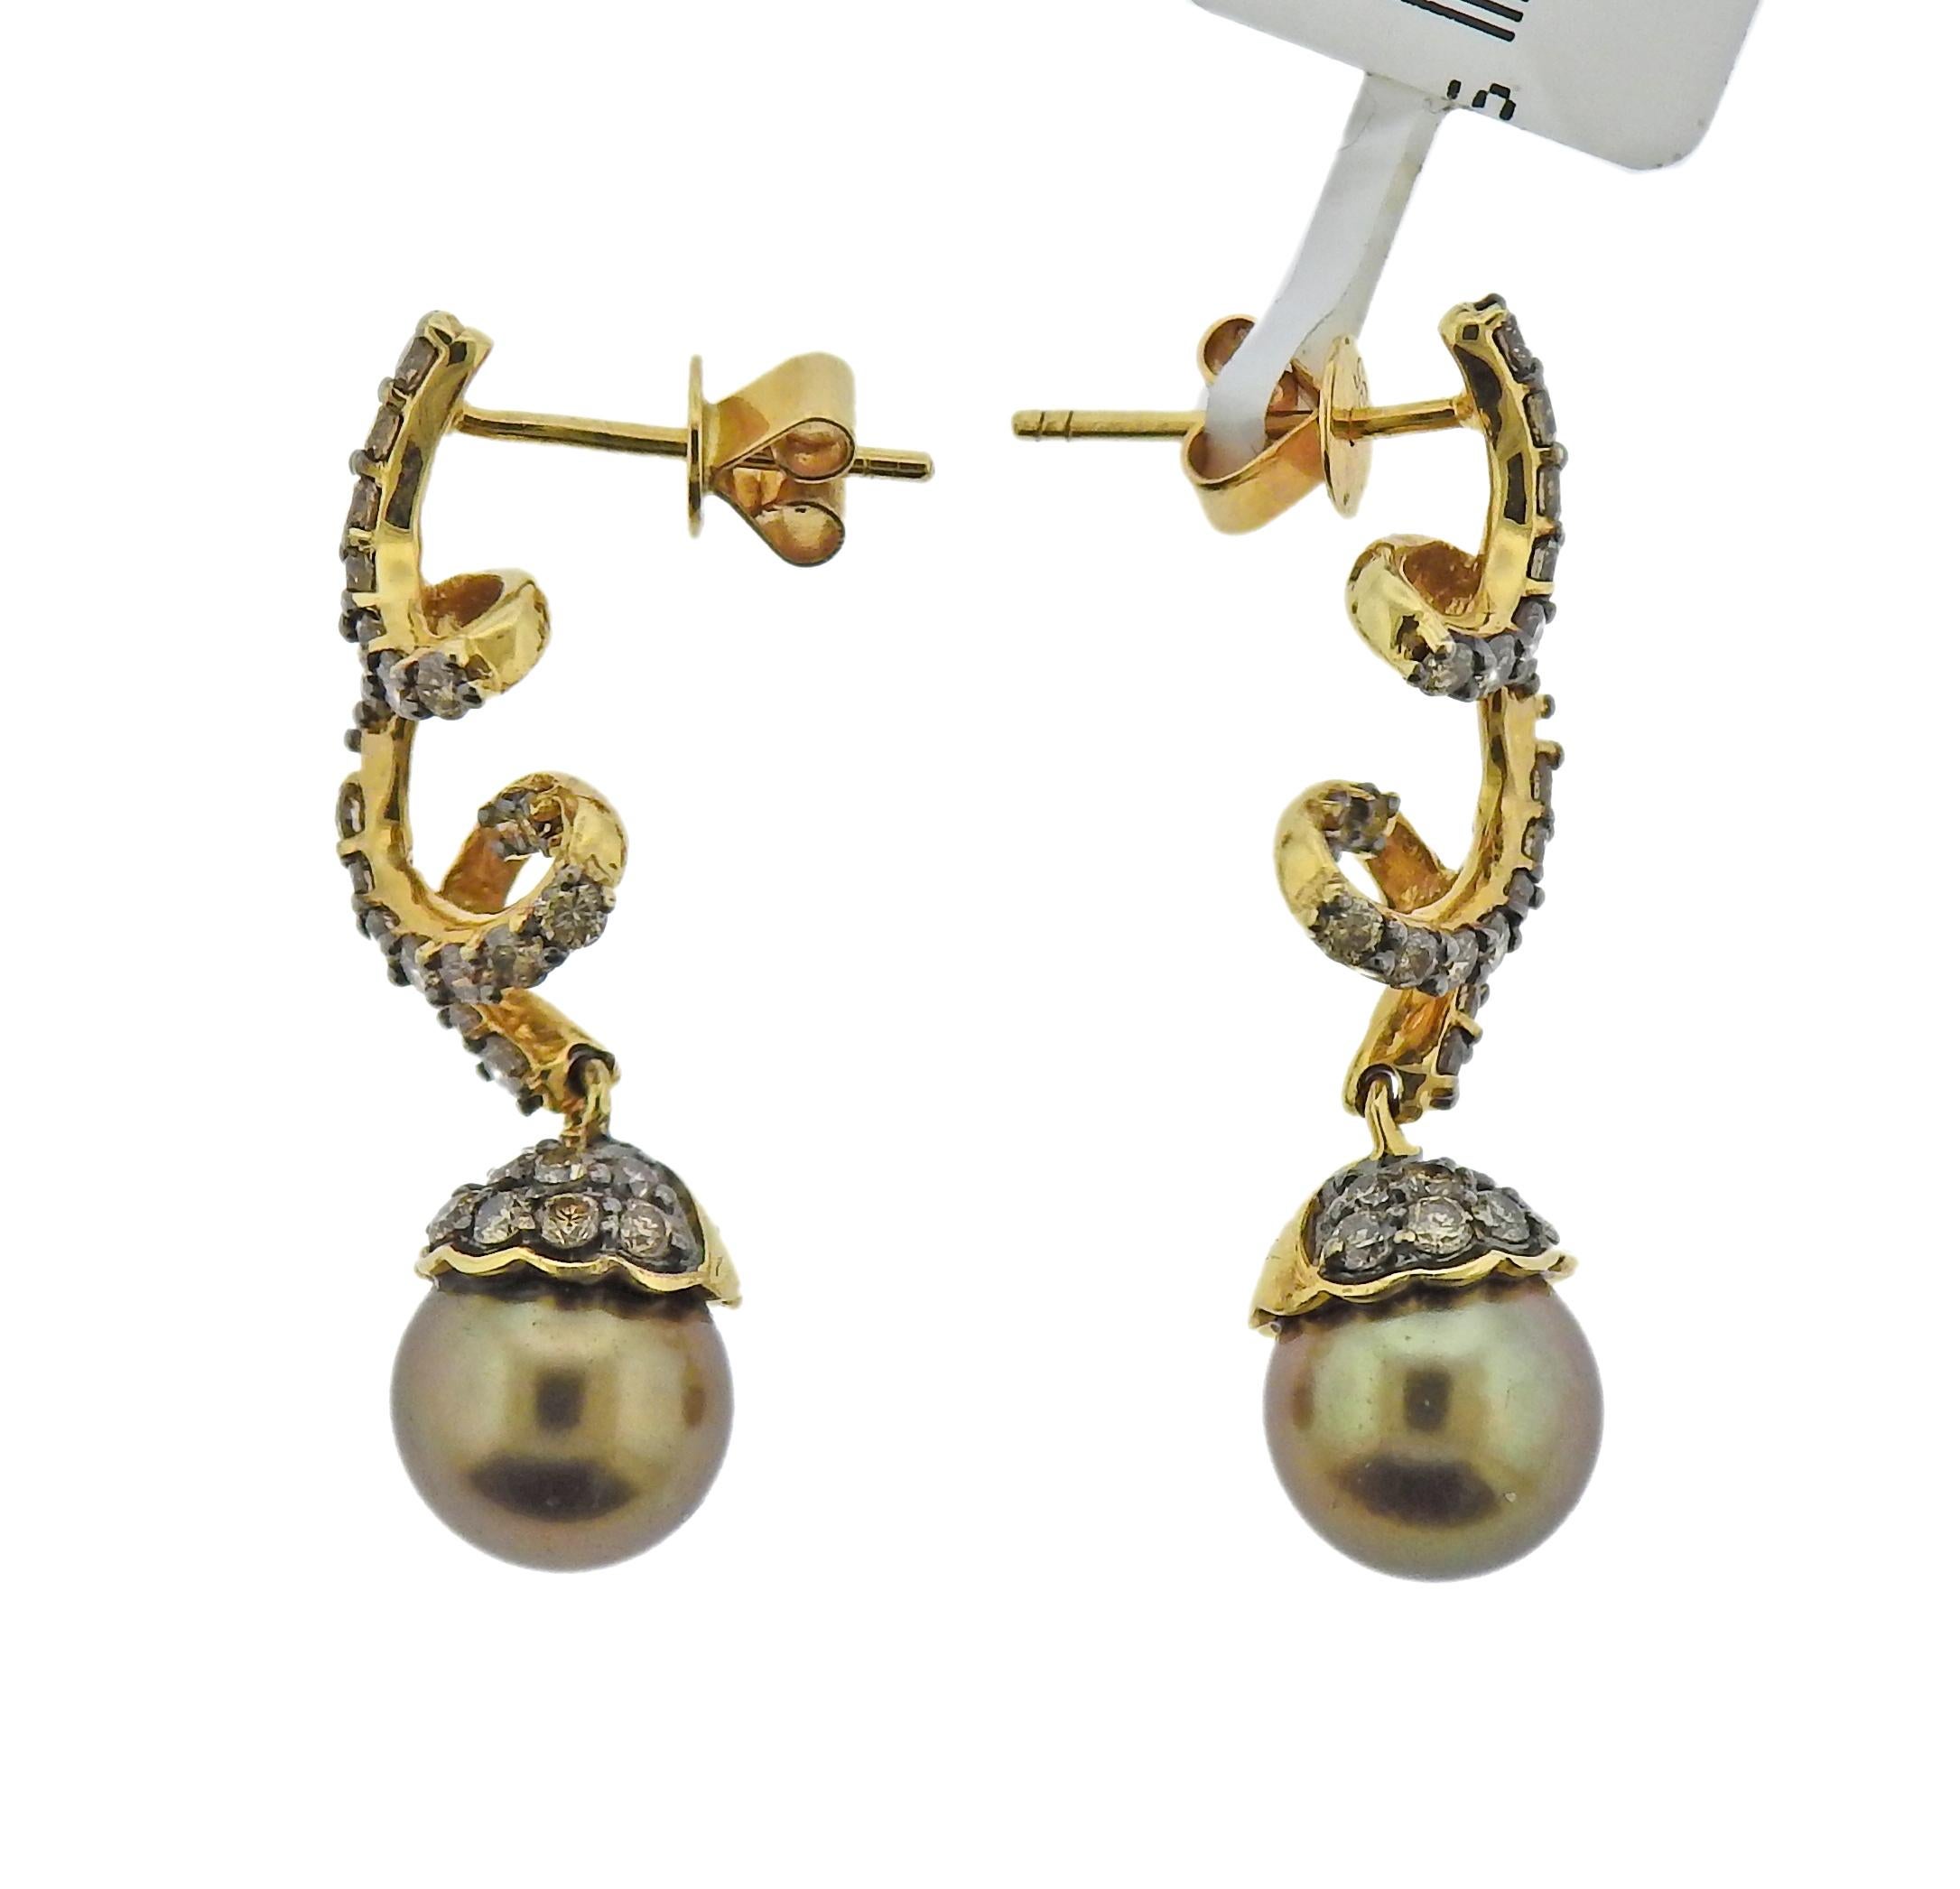 New Le Vian 14k gold earrings with 8.5mm chocolate pearls and approx. 1.20ctw in fancy chocolate diamonds. Retail $5895, come with pouch. Earrings are 32mm long.  Weight - 5.7 grams. Marked:   14k, Le Vian mark. 